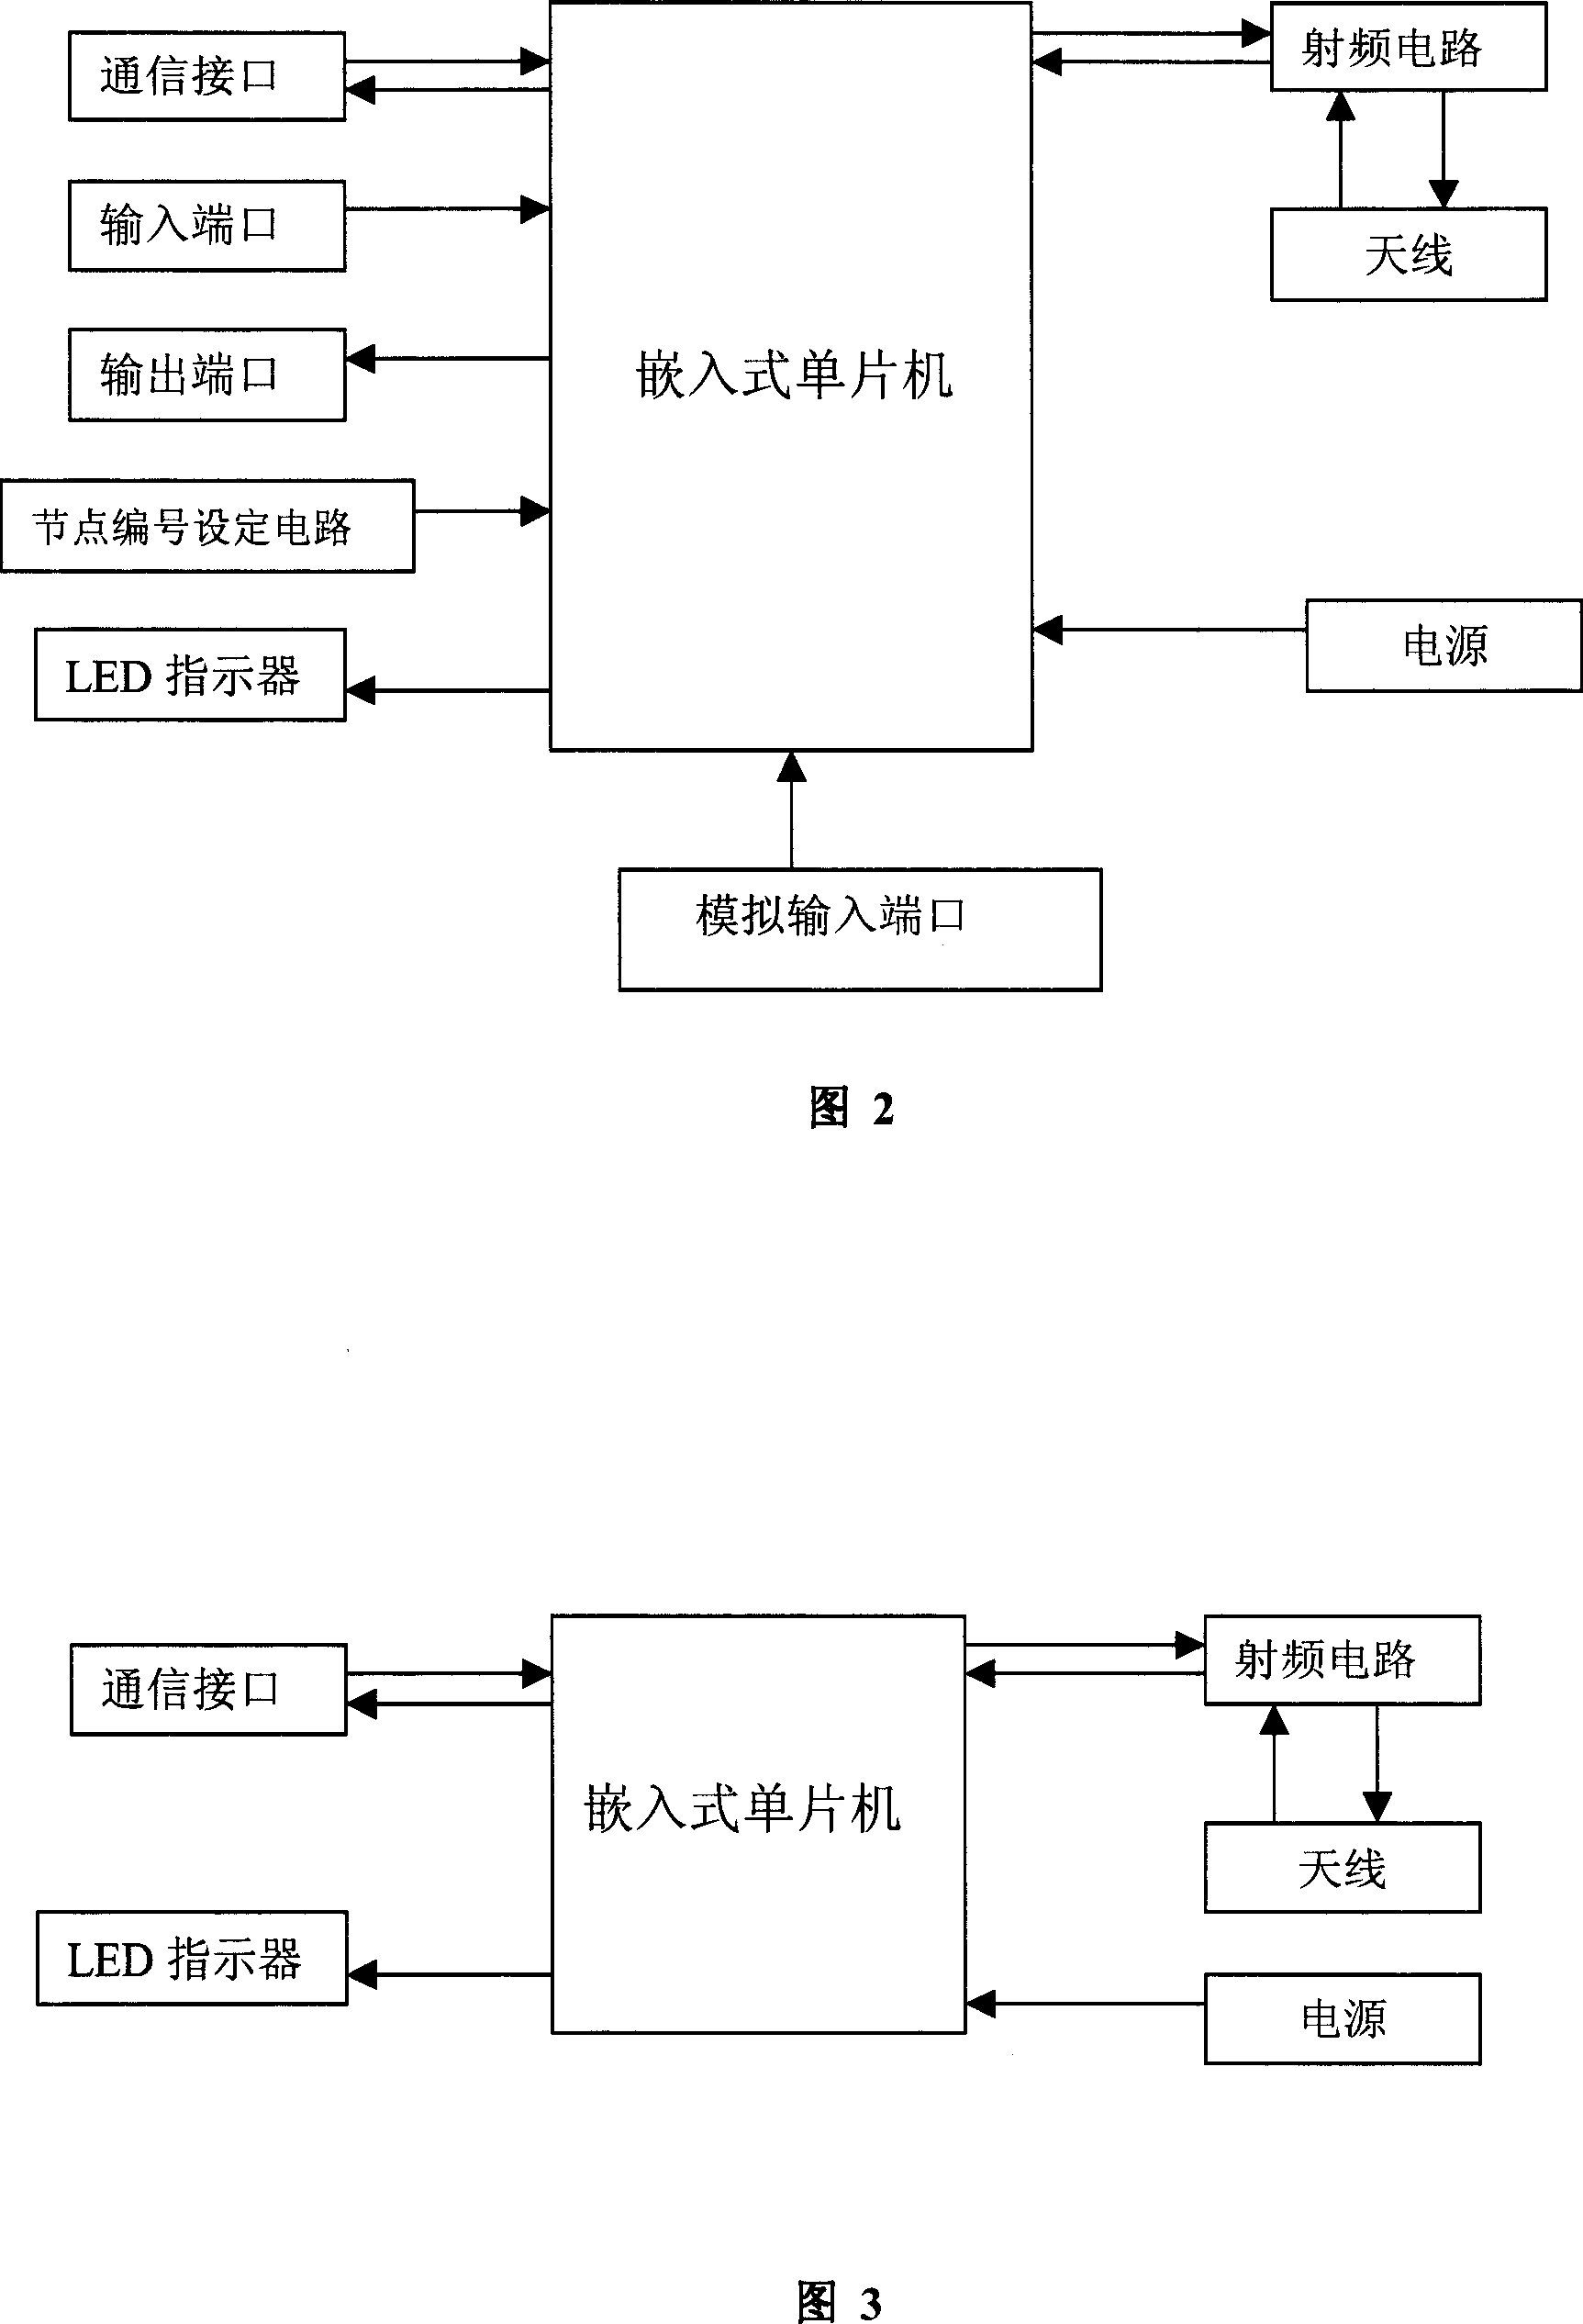 Network system for managing textile equipment